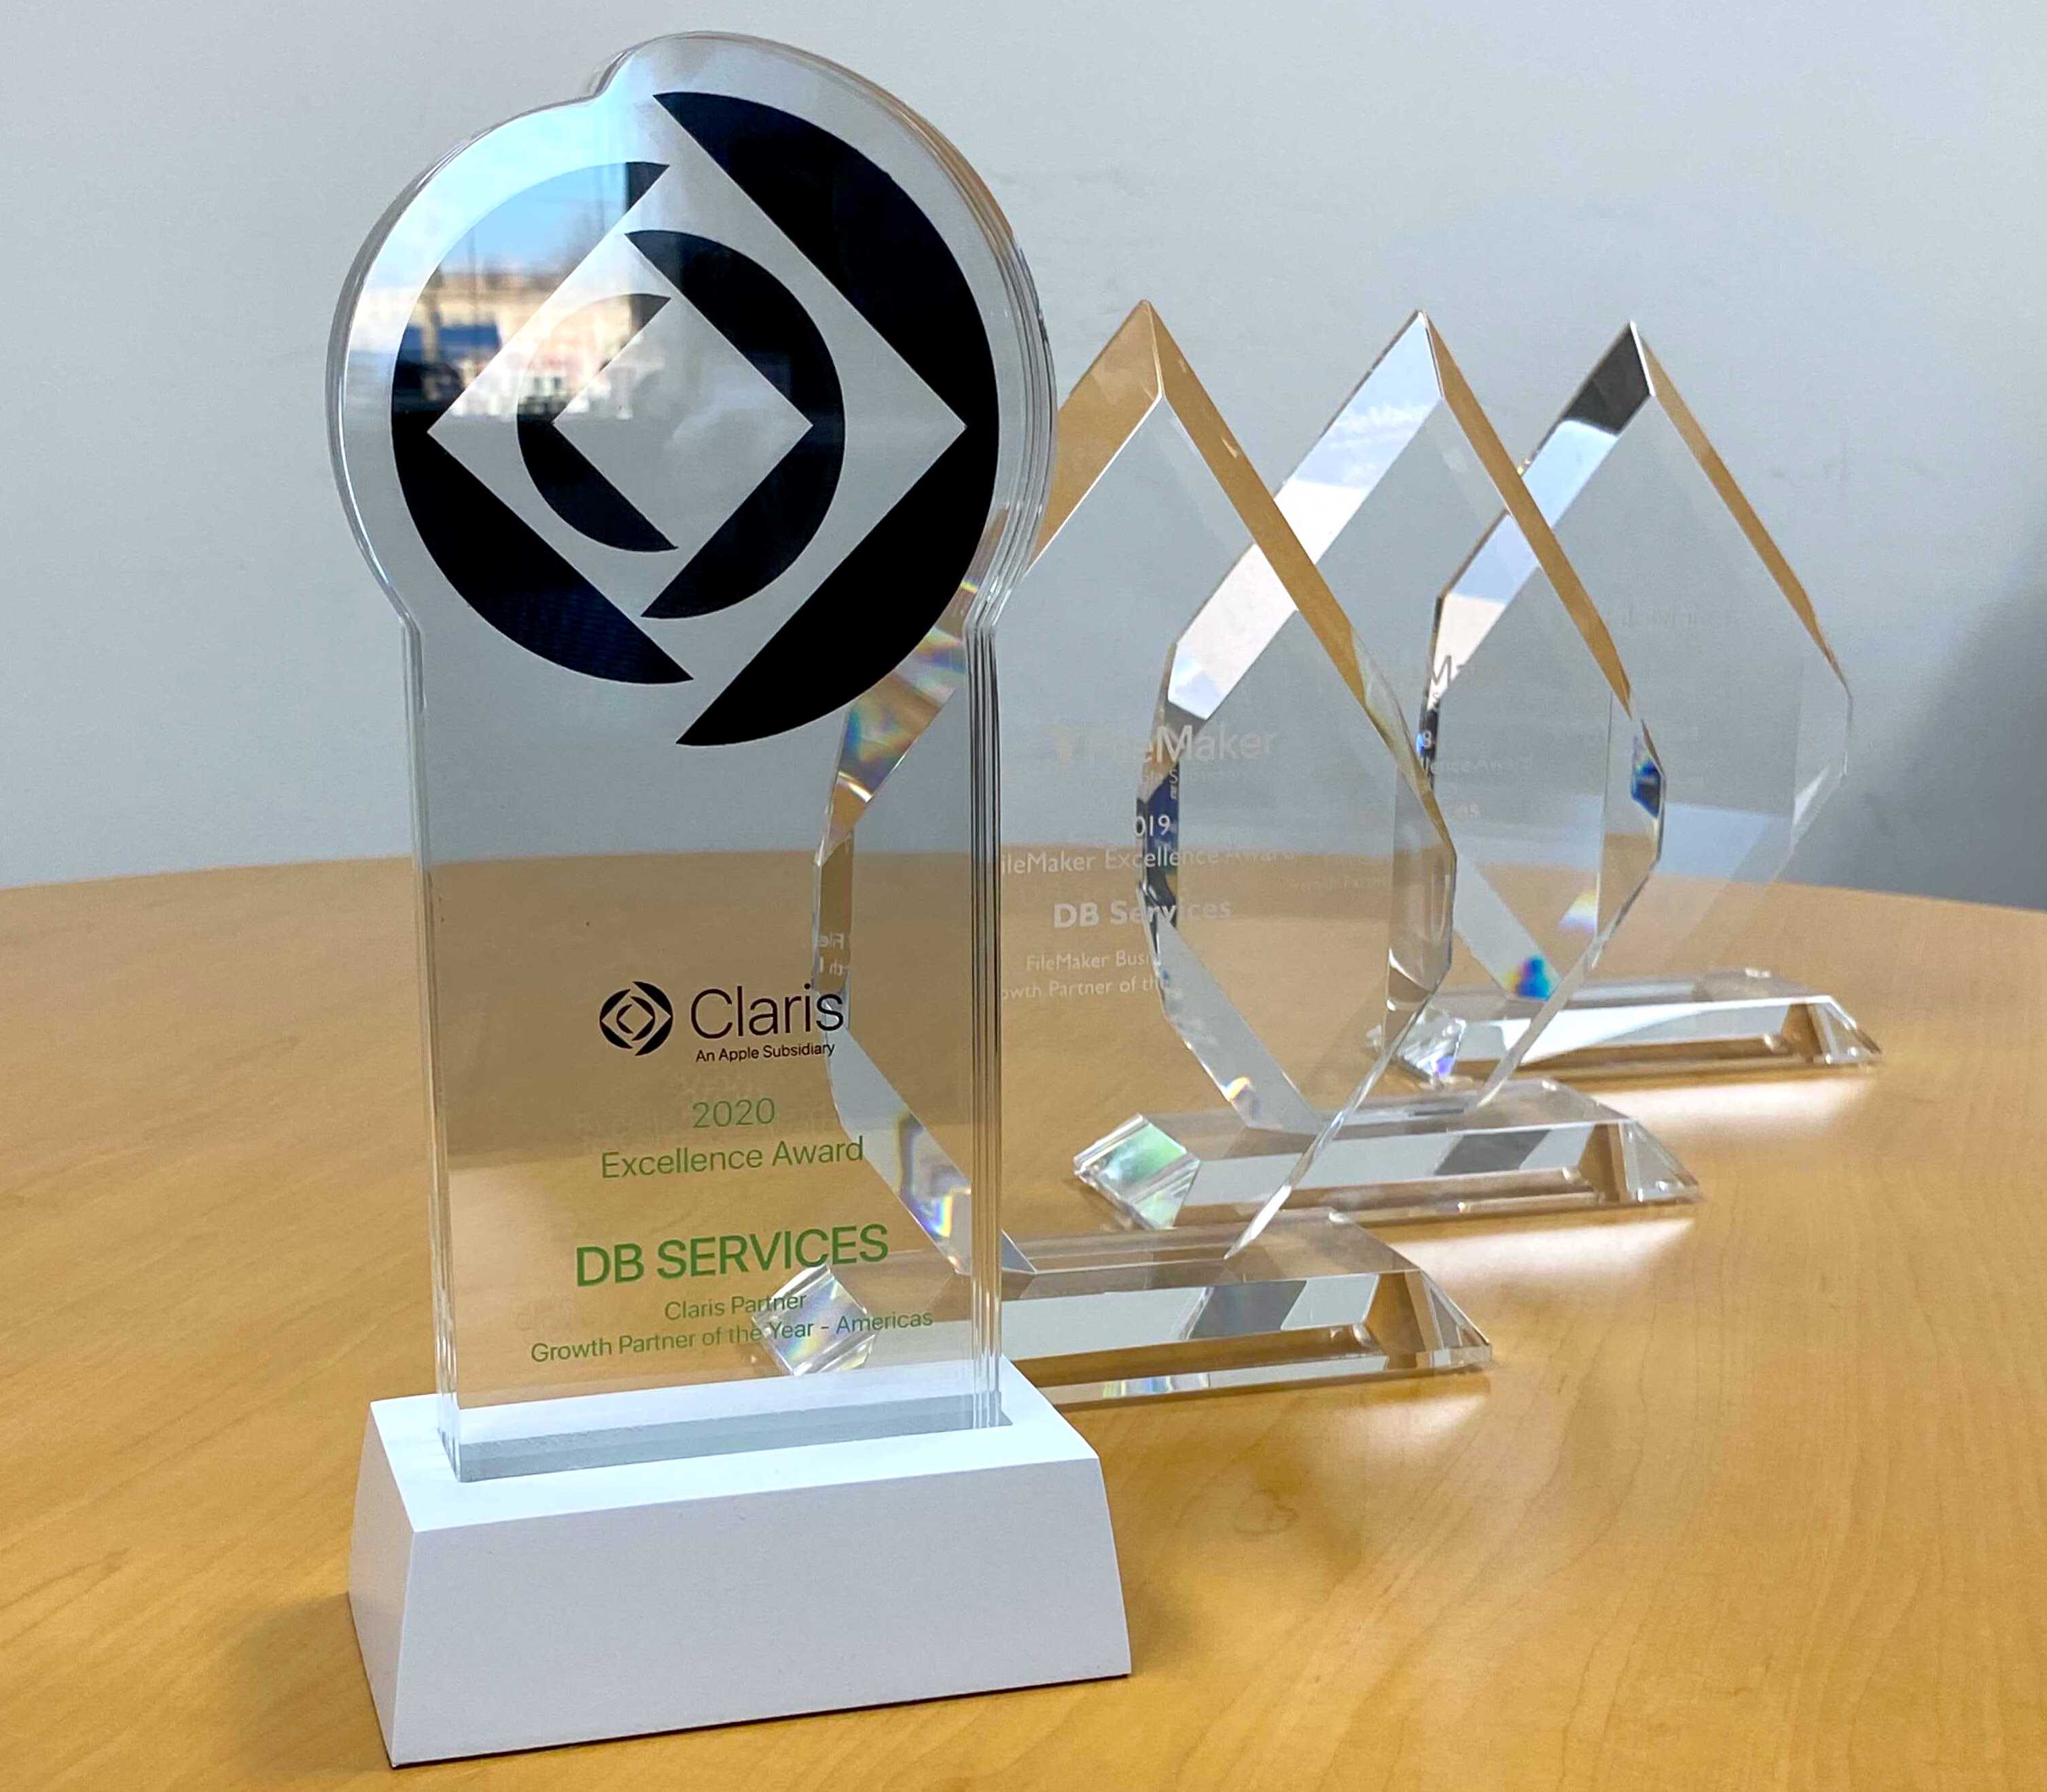 DB Services' collection of 4 Claris partner of the year awards